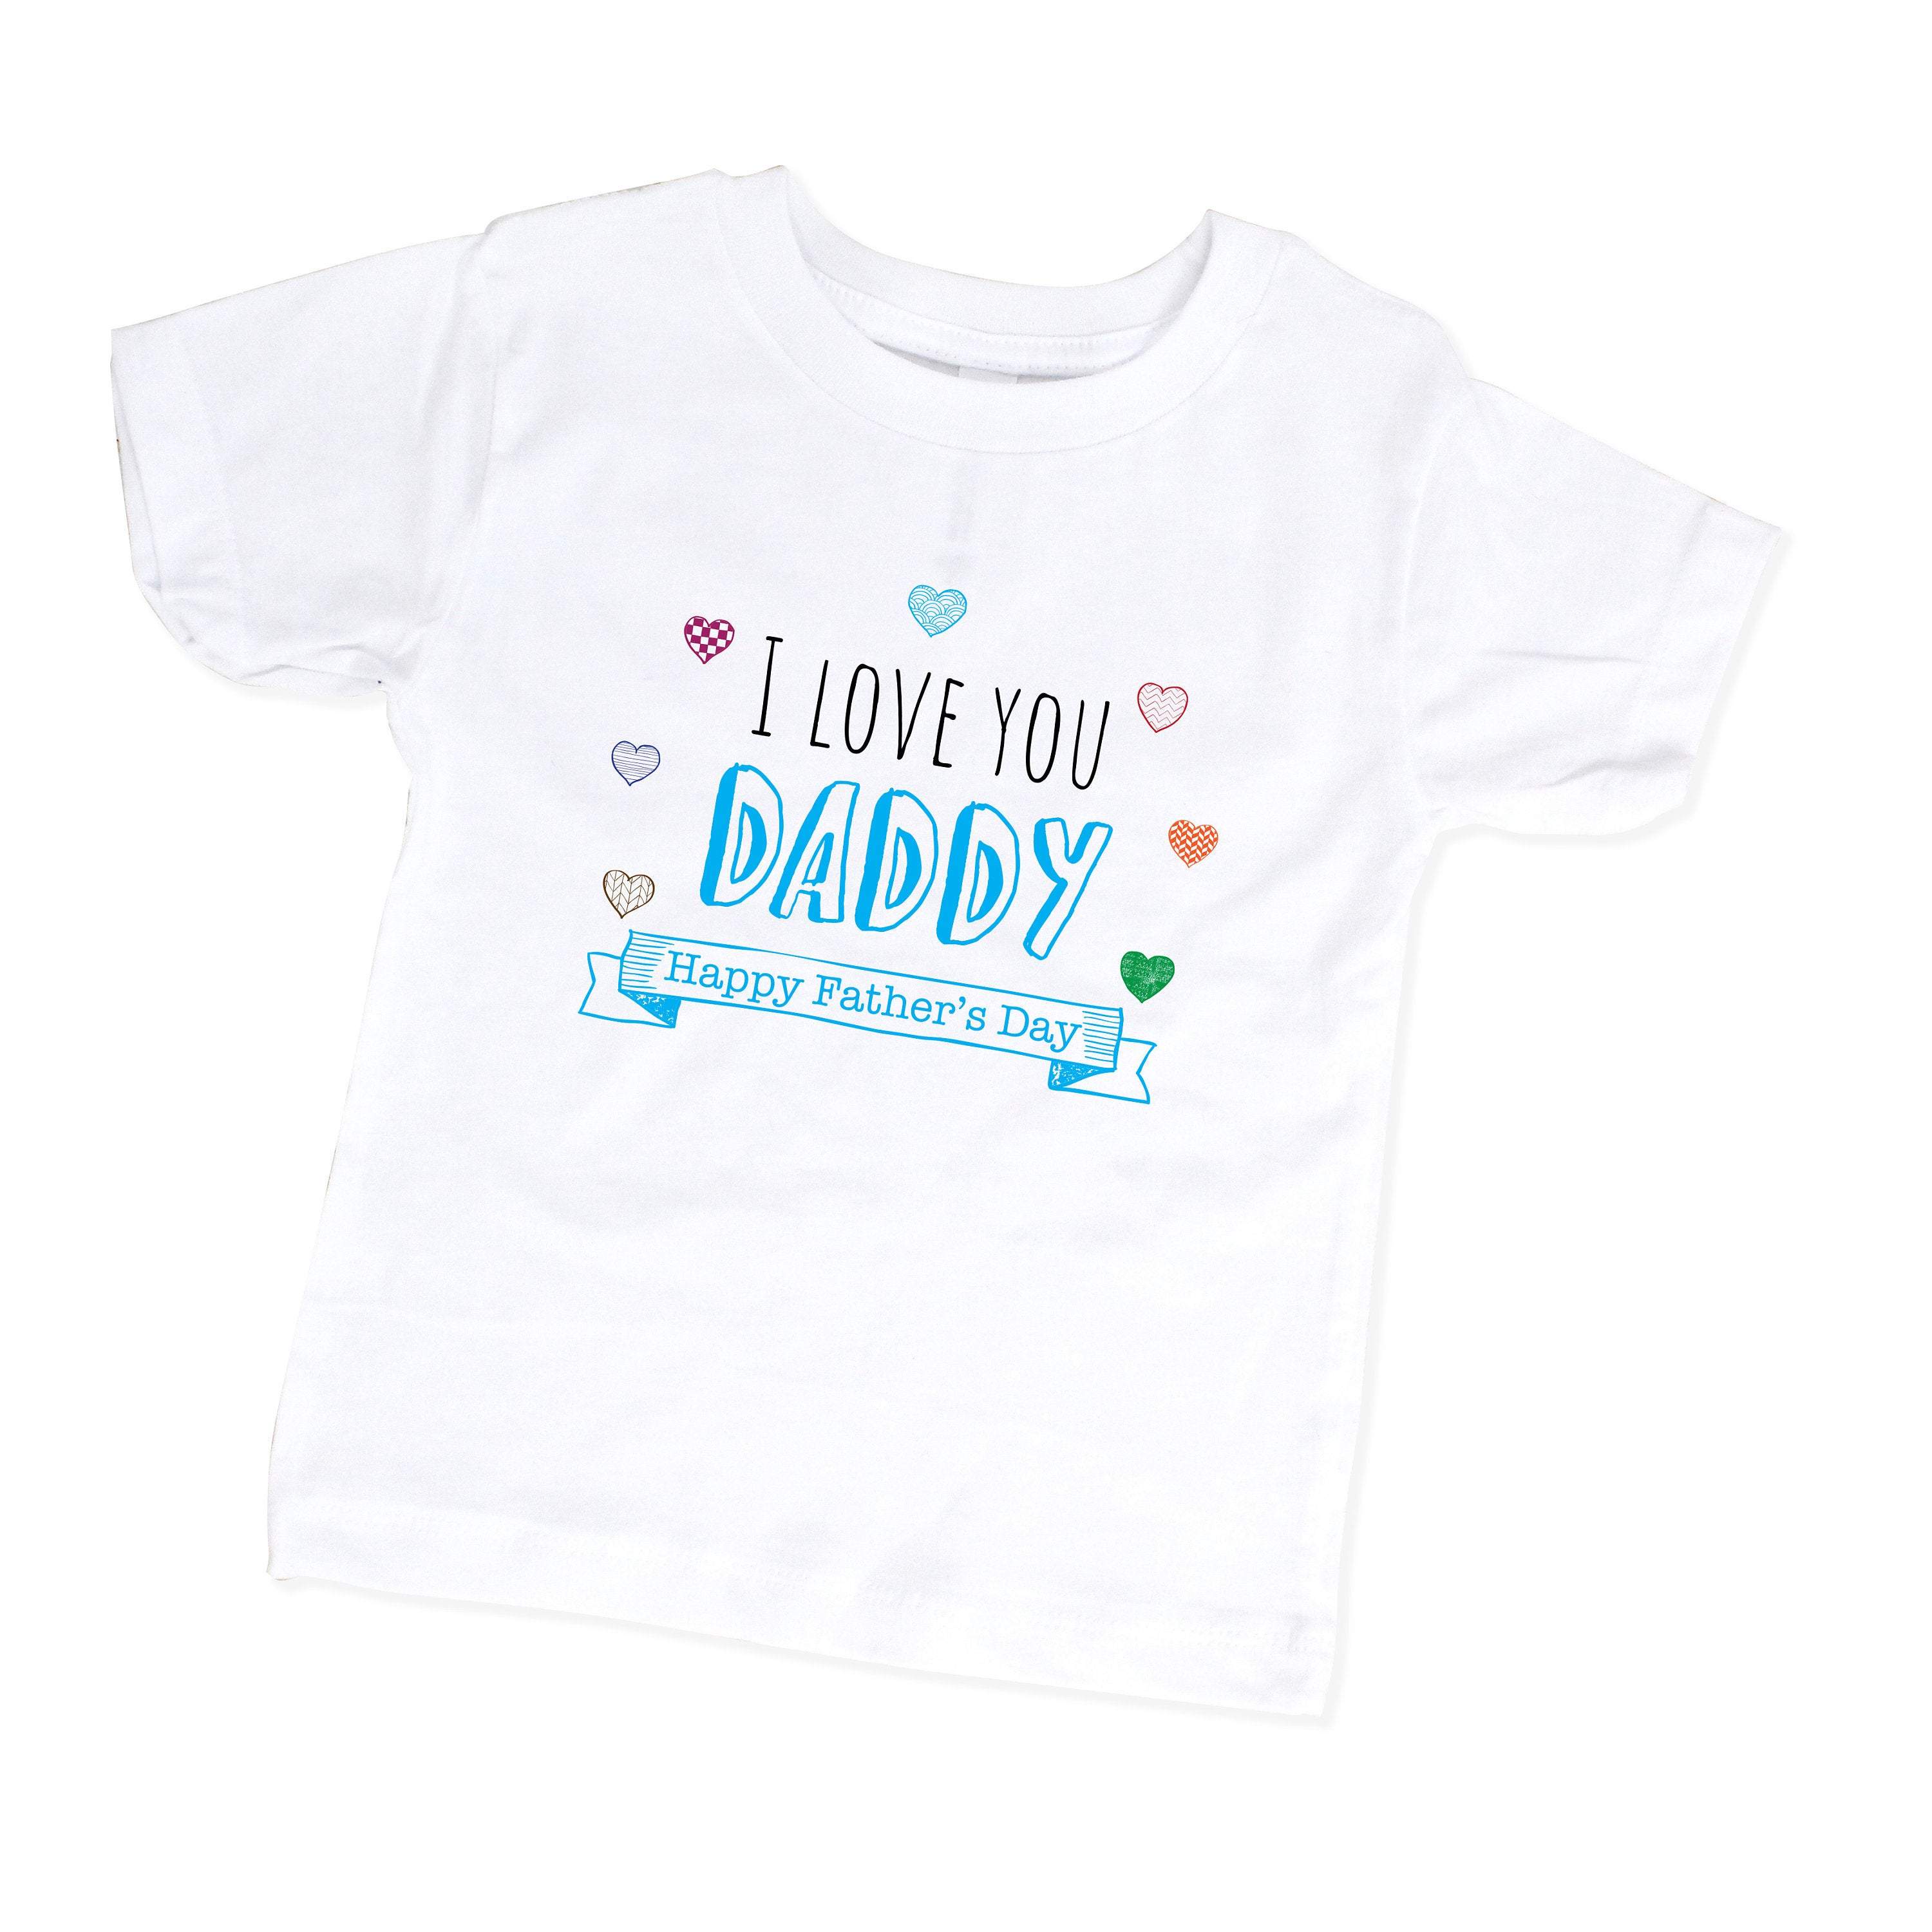 I Love you daddy Happy Father's Day tshirt, First fathers day gift, Kids tshirt for dad